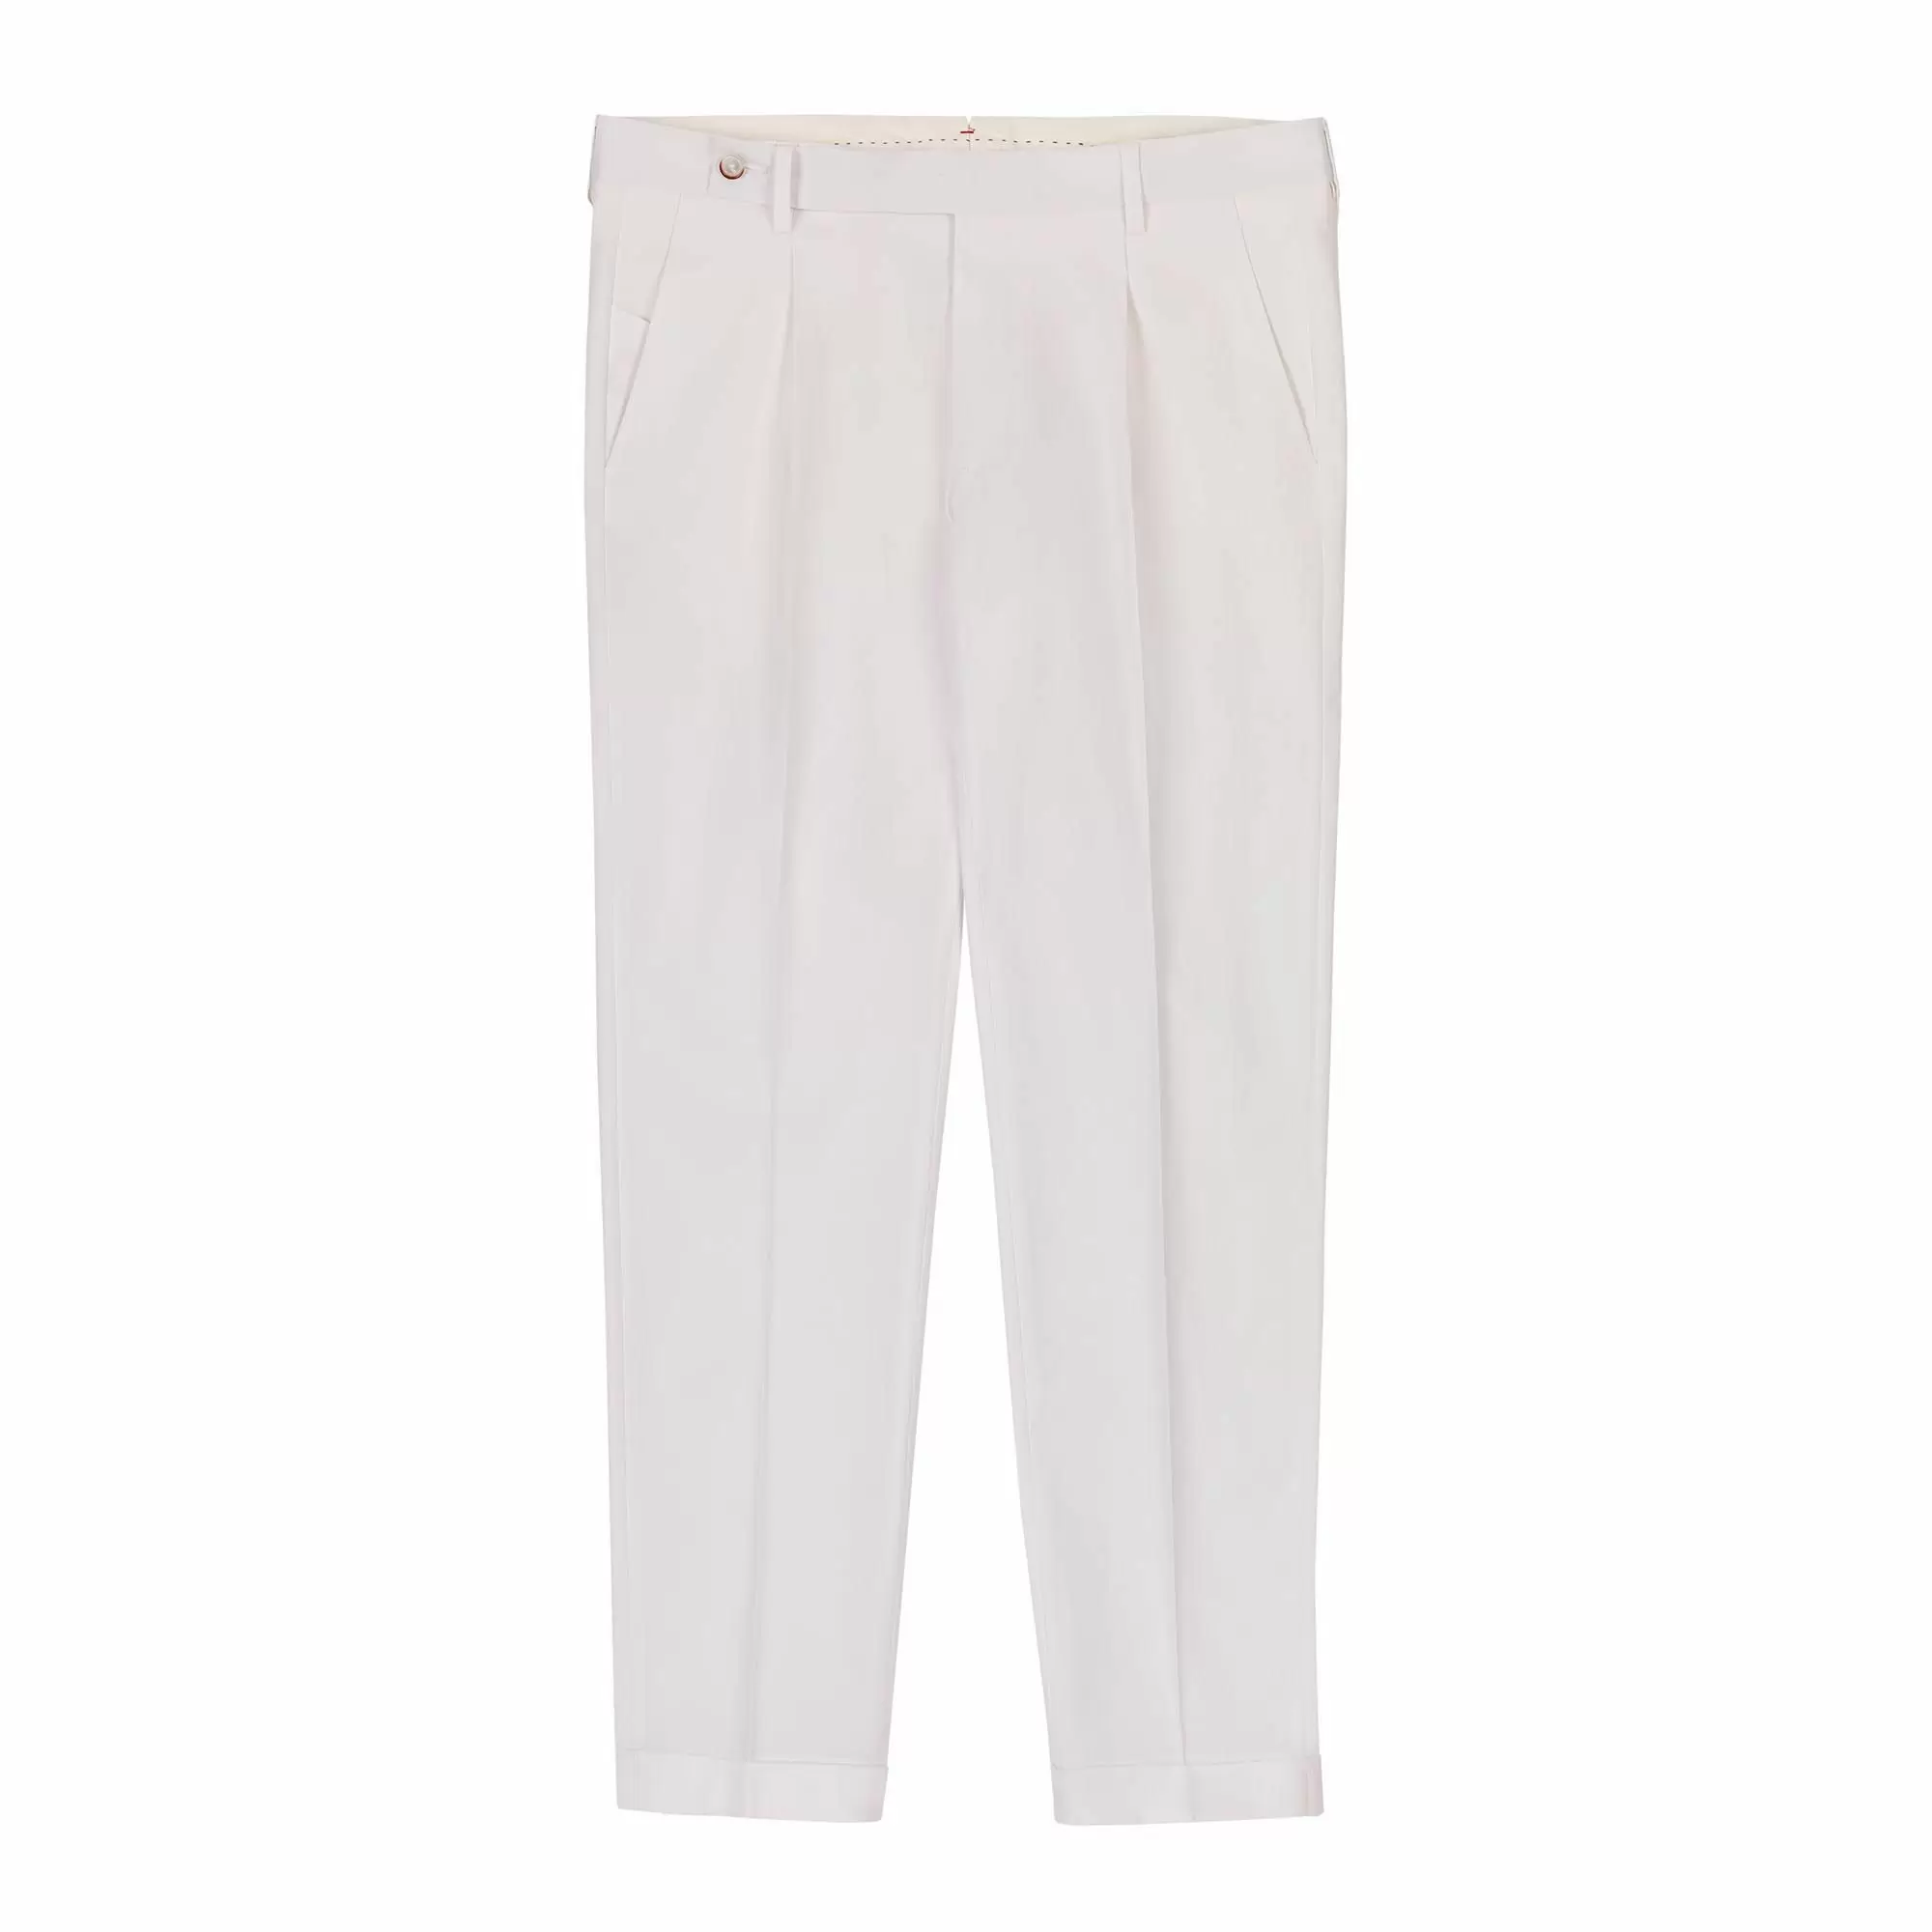 Men's Stretch Cotton Pleated Pants White